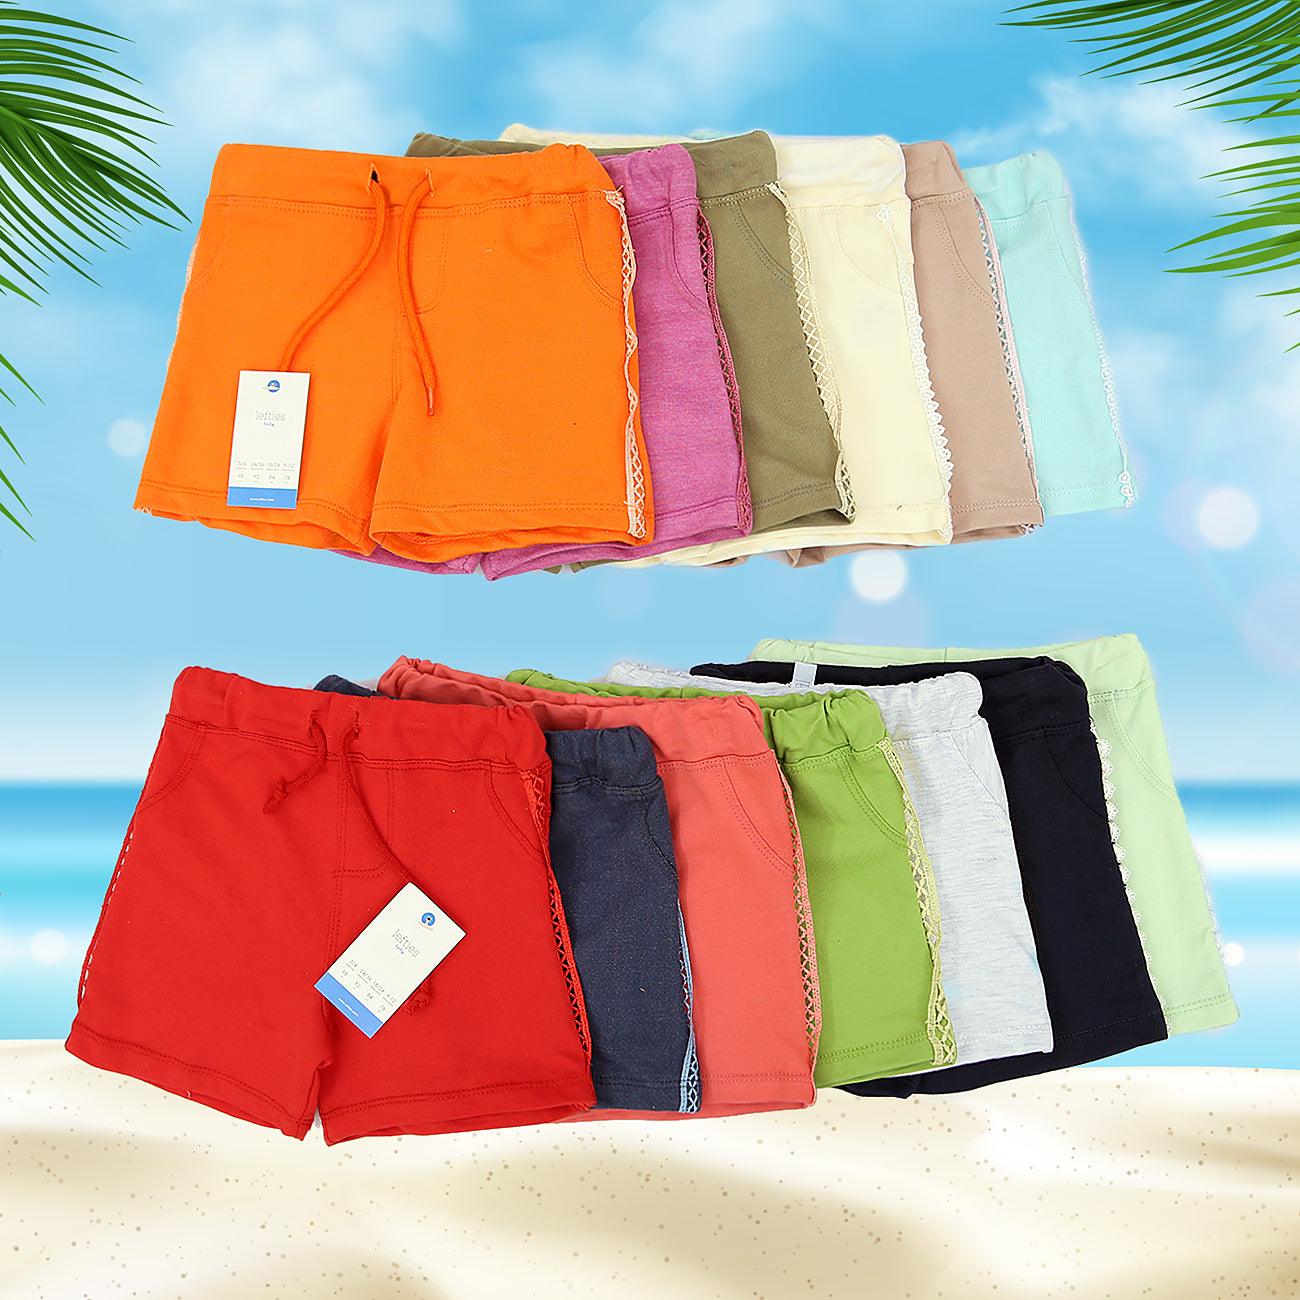 Premium Quality Lightweight and Soft Fashion Short For Girls - Brands River